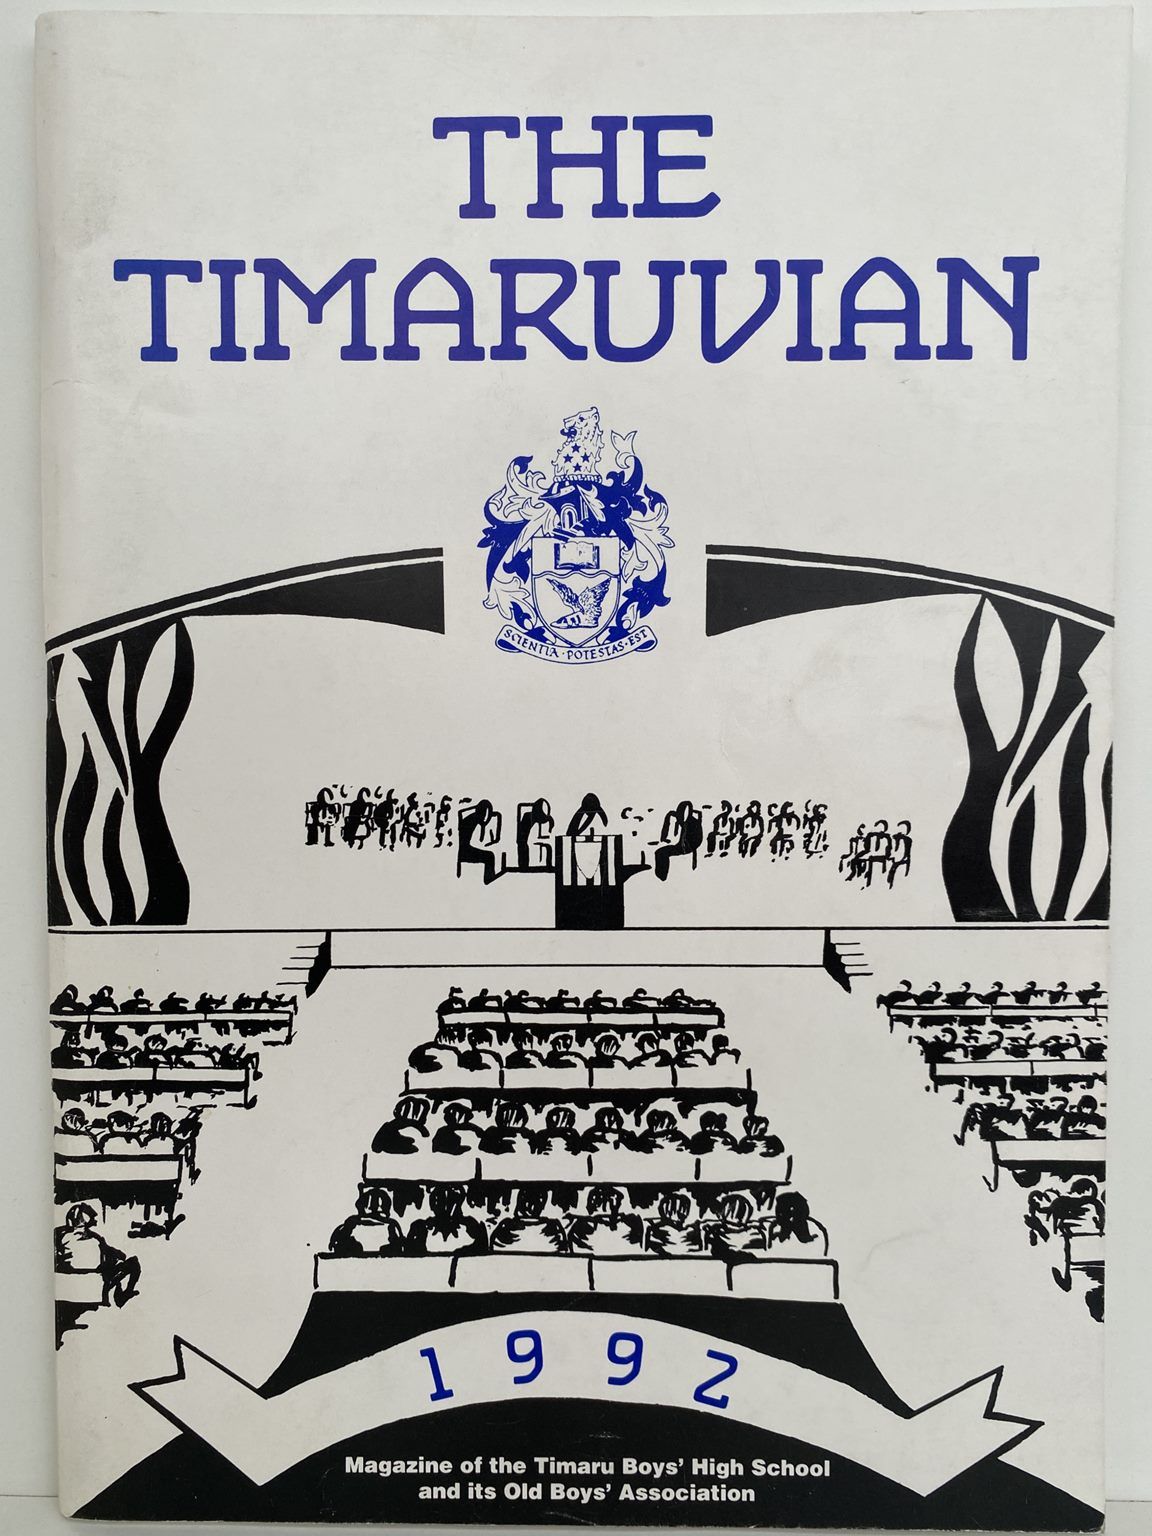 THE TIMARUVIAN: Magazine of the Timaru Boys' High School and its Old Boys' Association 1992